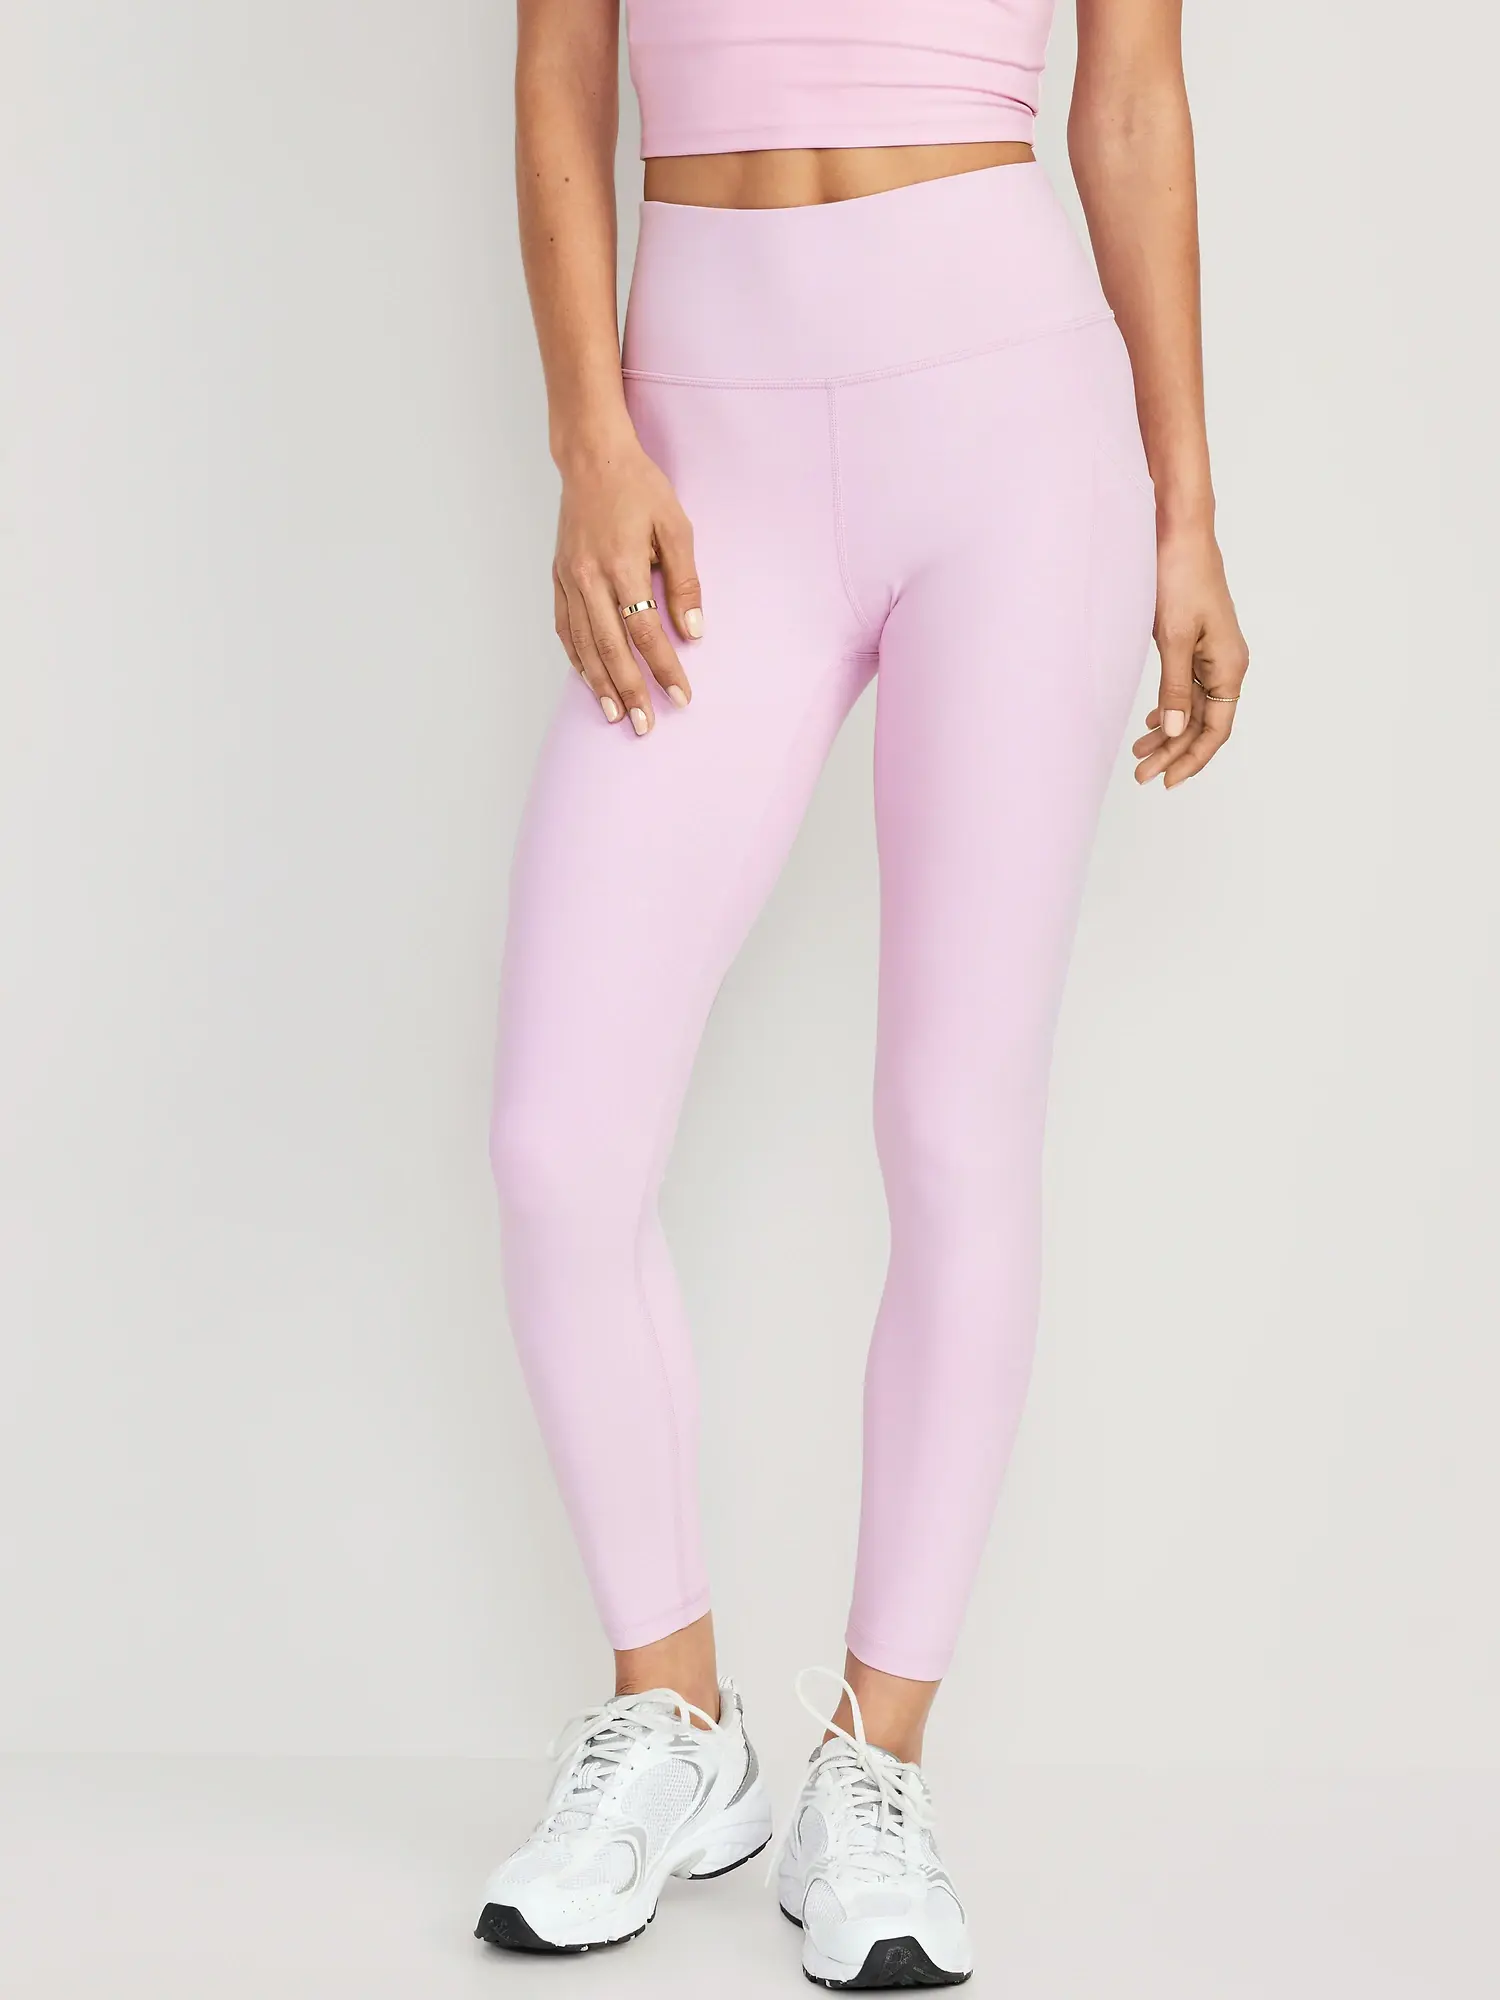 Old Navy - High-Waisted PowerSoft 7/8 Leggings for Women purple